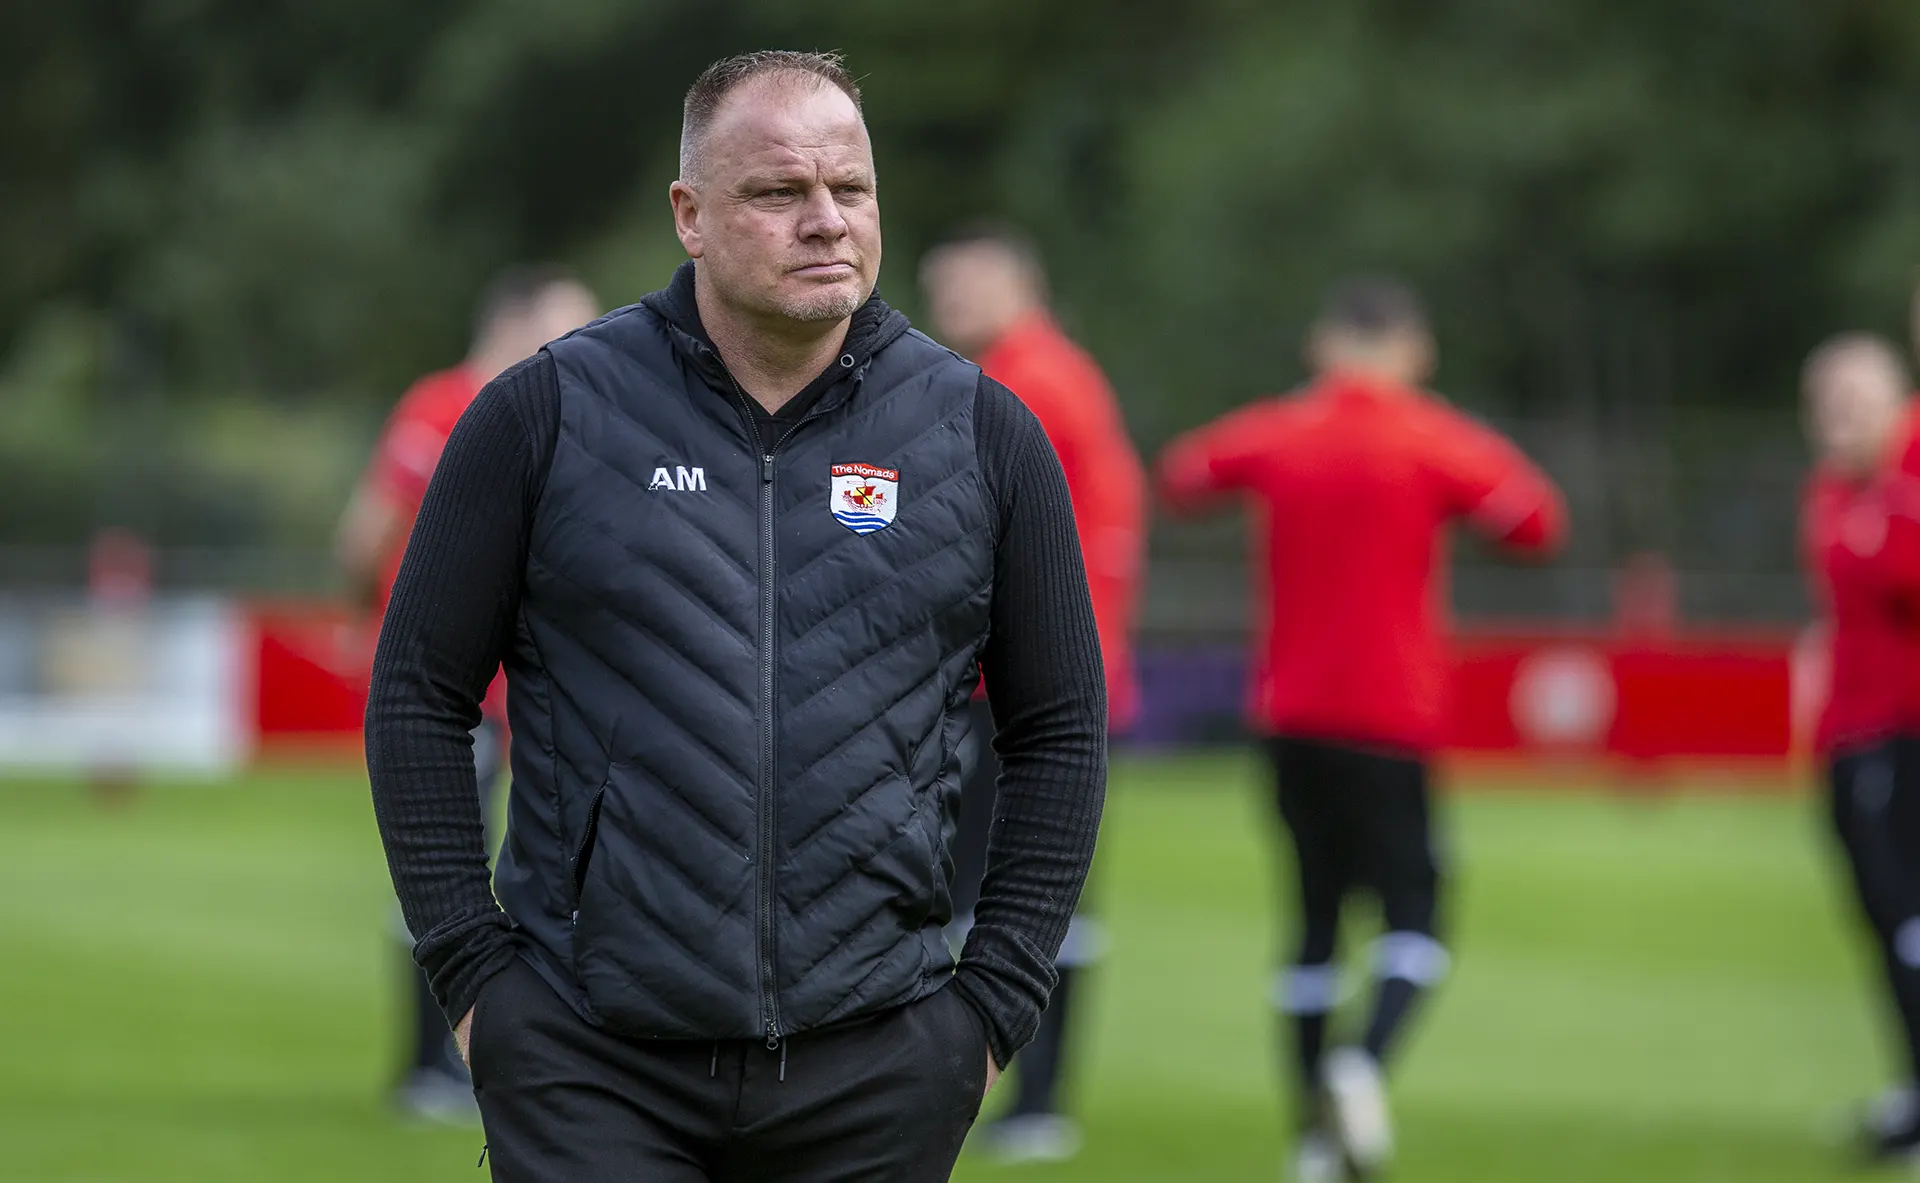 Andy Morrison's last game as Connah's Quay Nomads' Manager was the 4-0 JD Welsh Cup win over Trefelin BGC © NCM Media